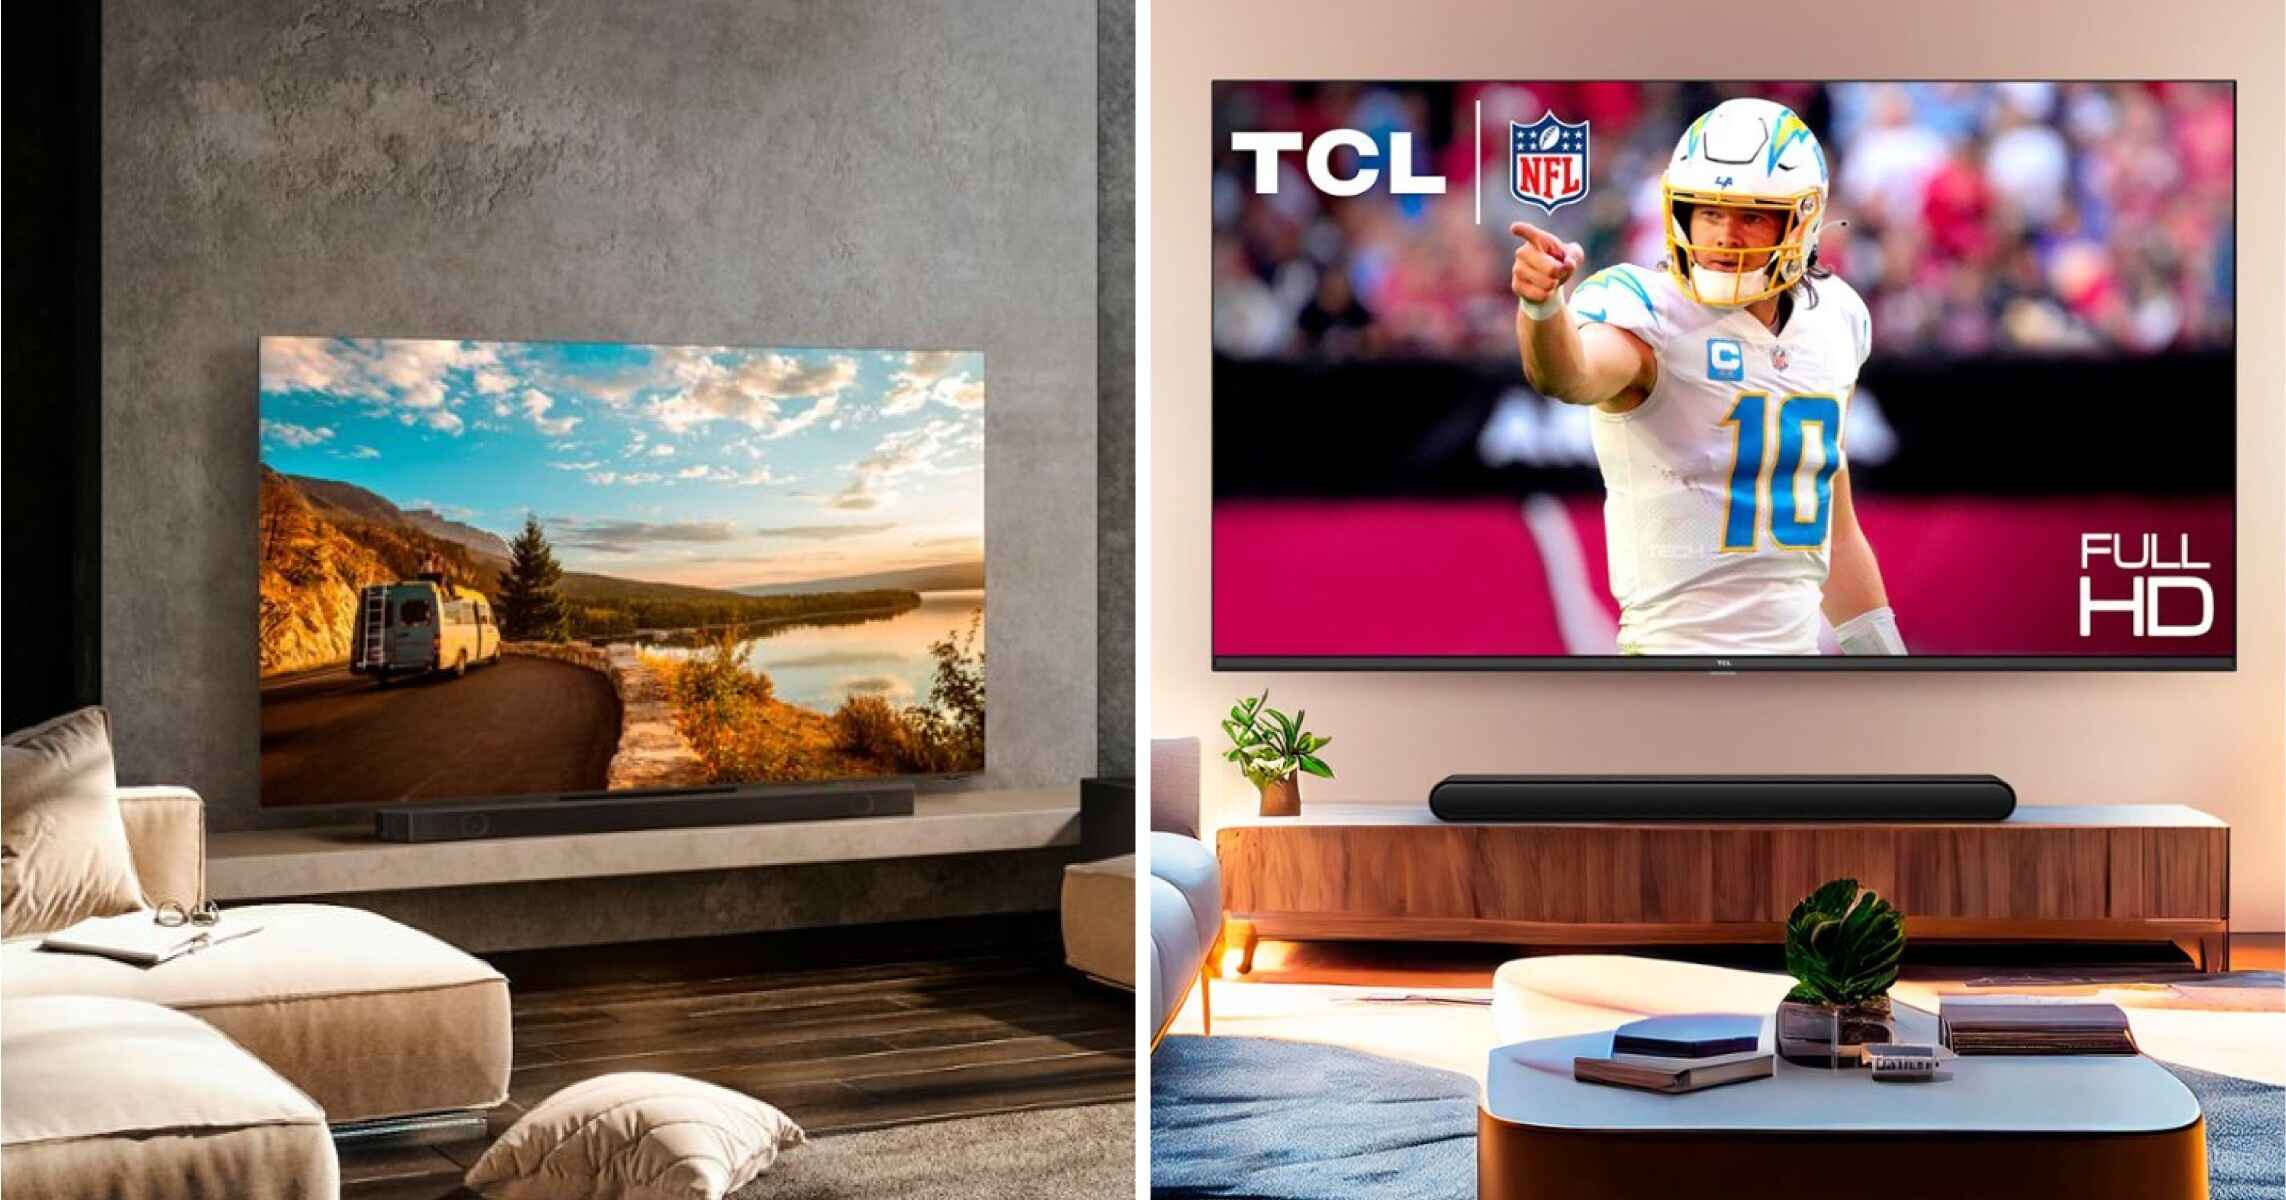 How To Connect My Laptop To TCL Smart TV